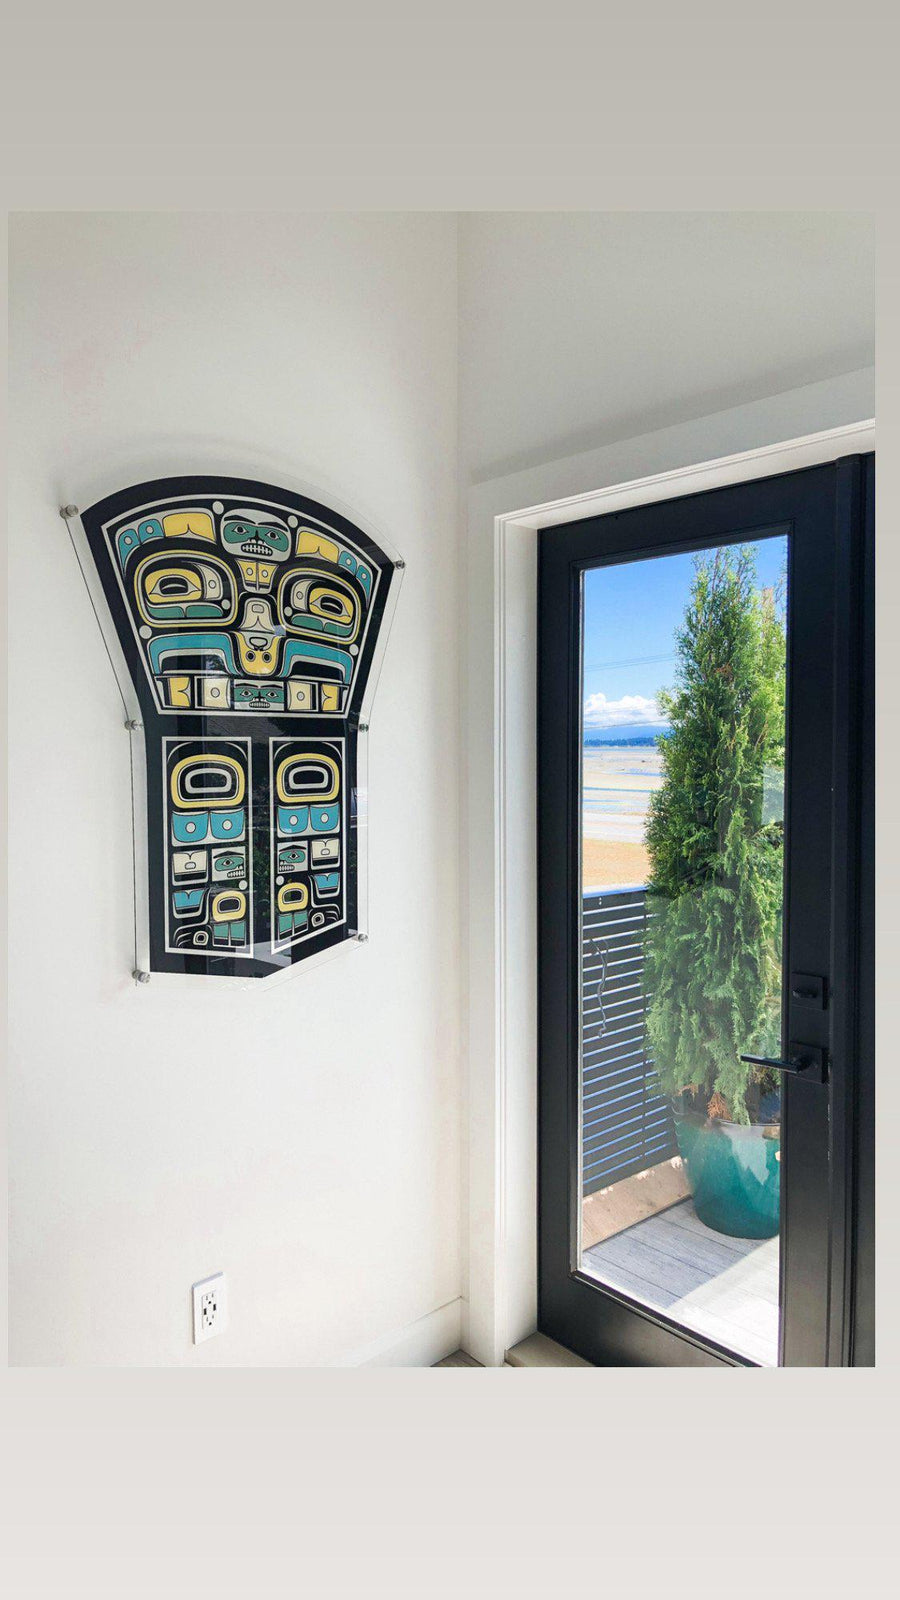 Native fine art print on wall called Prosperity by indigenous artist Andy Everson